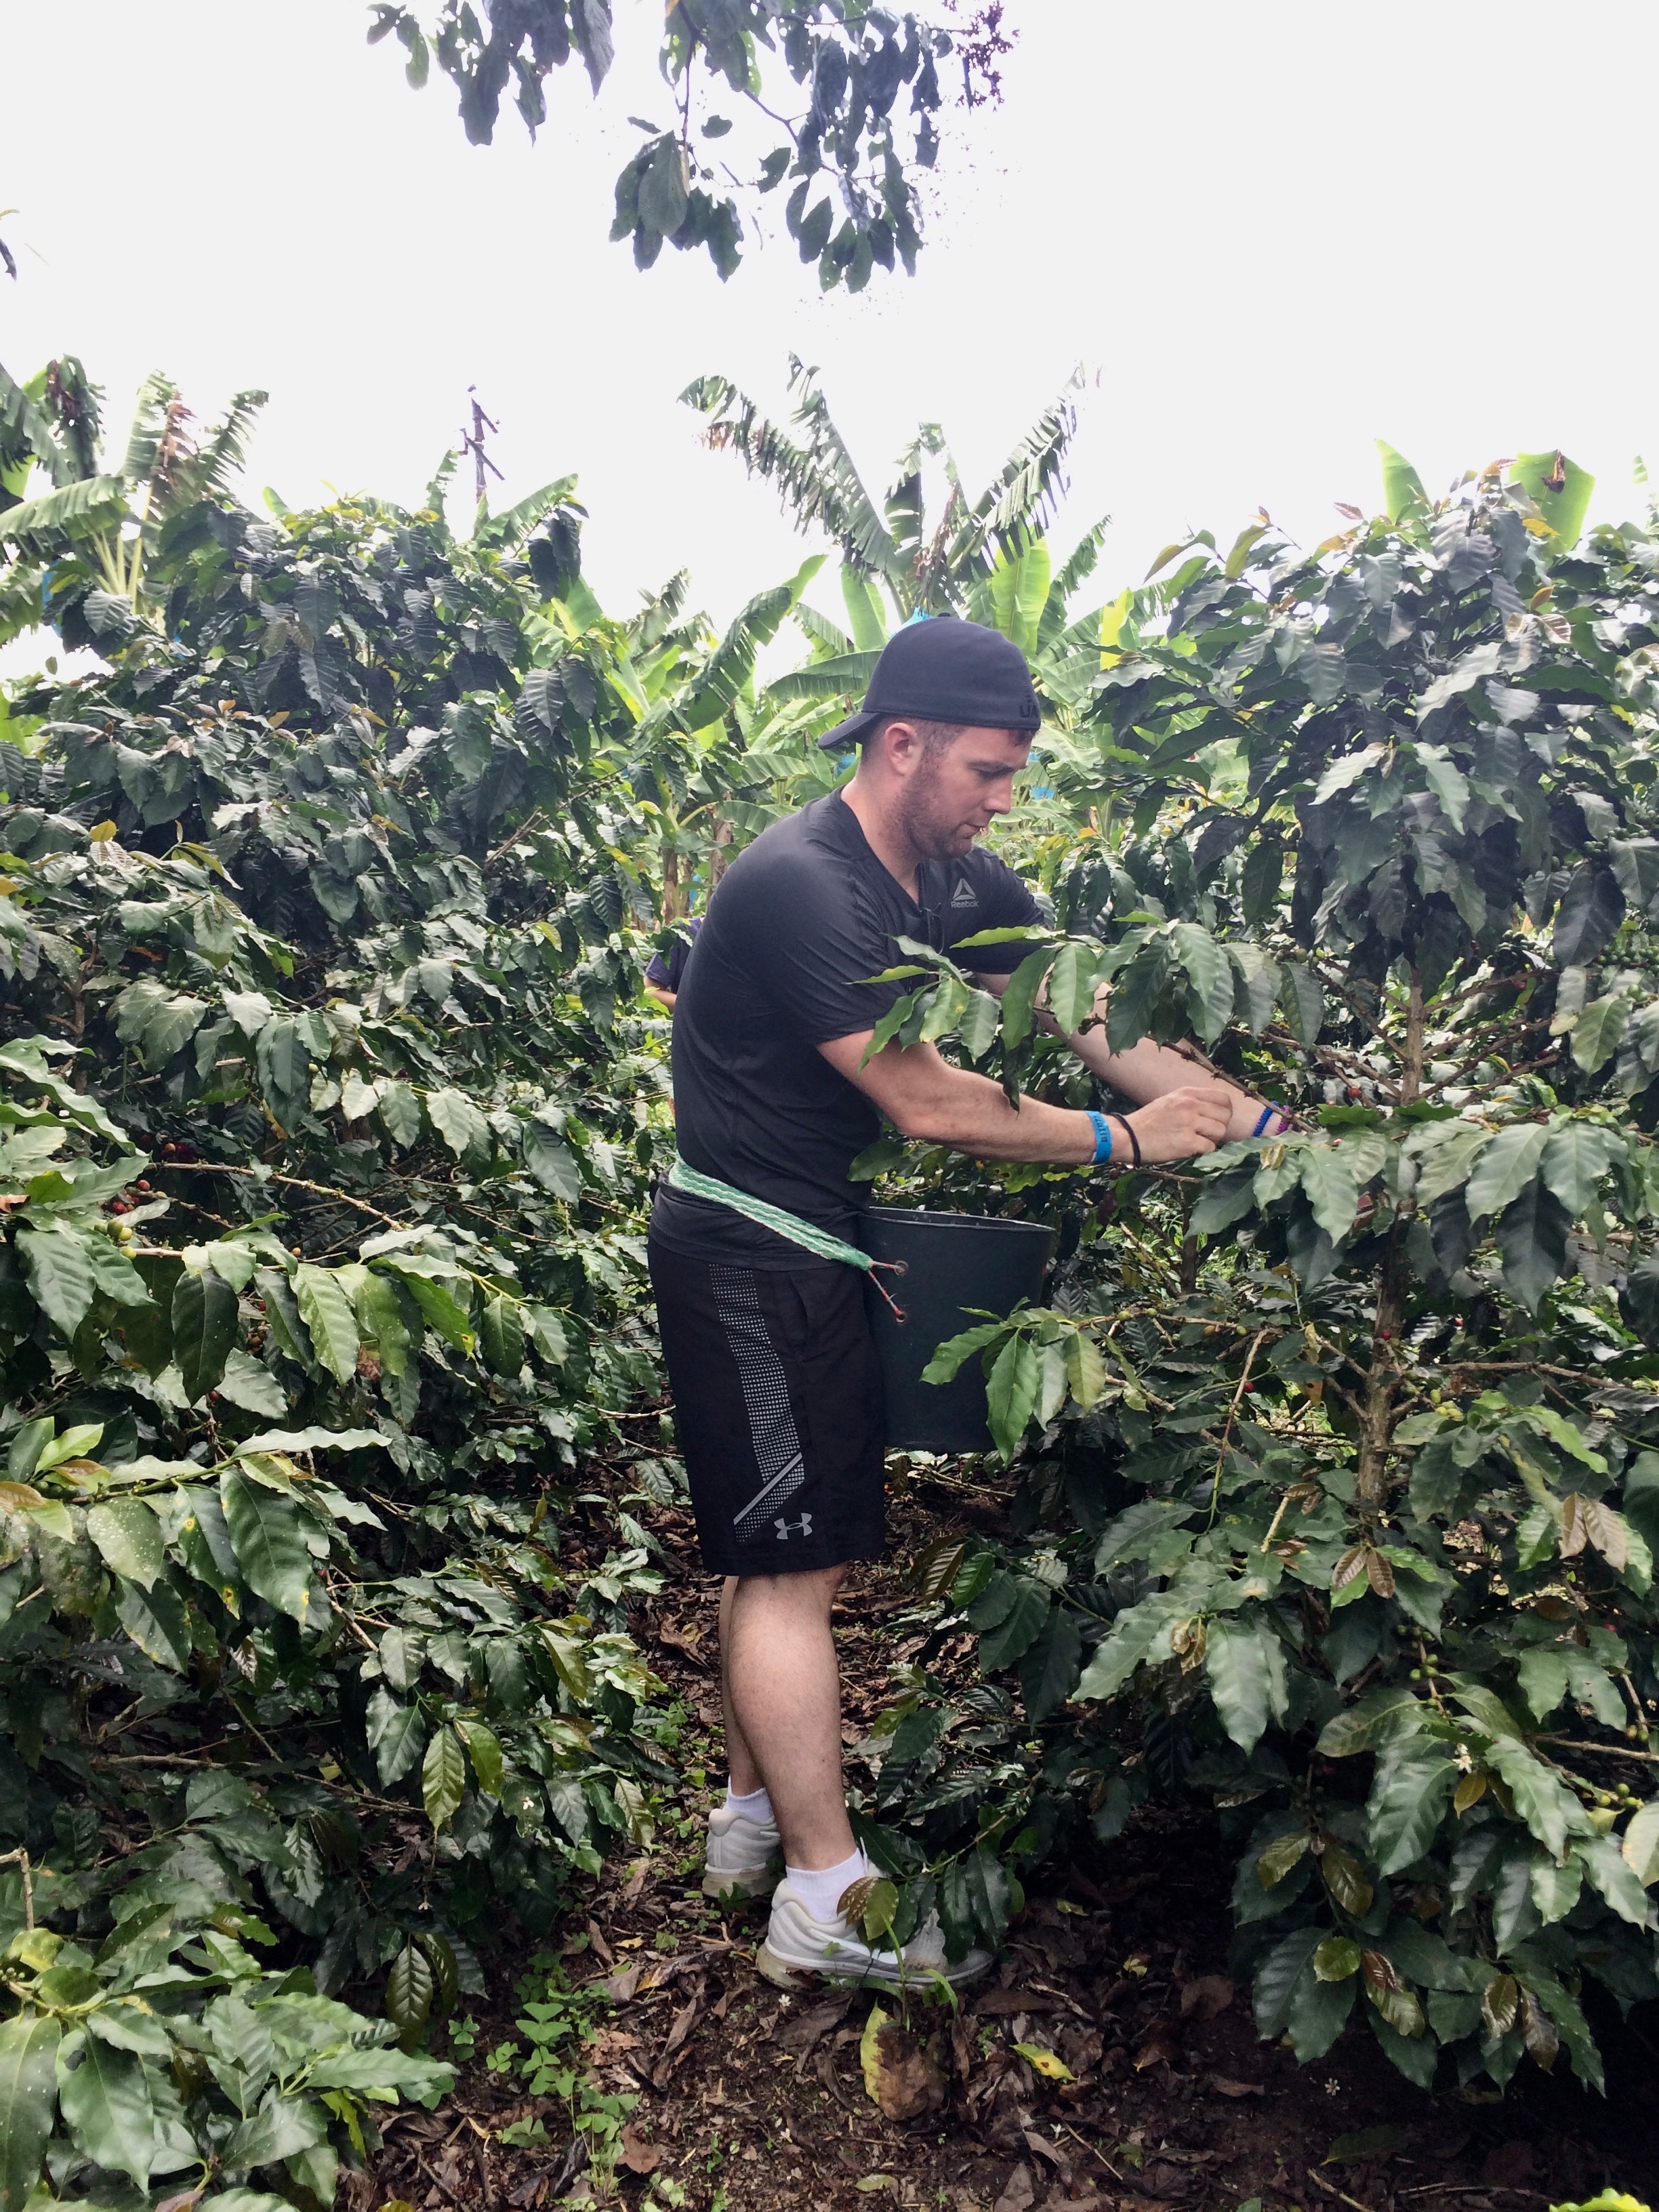 Matt picking green coffee beans in Colombia